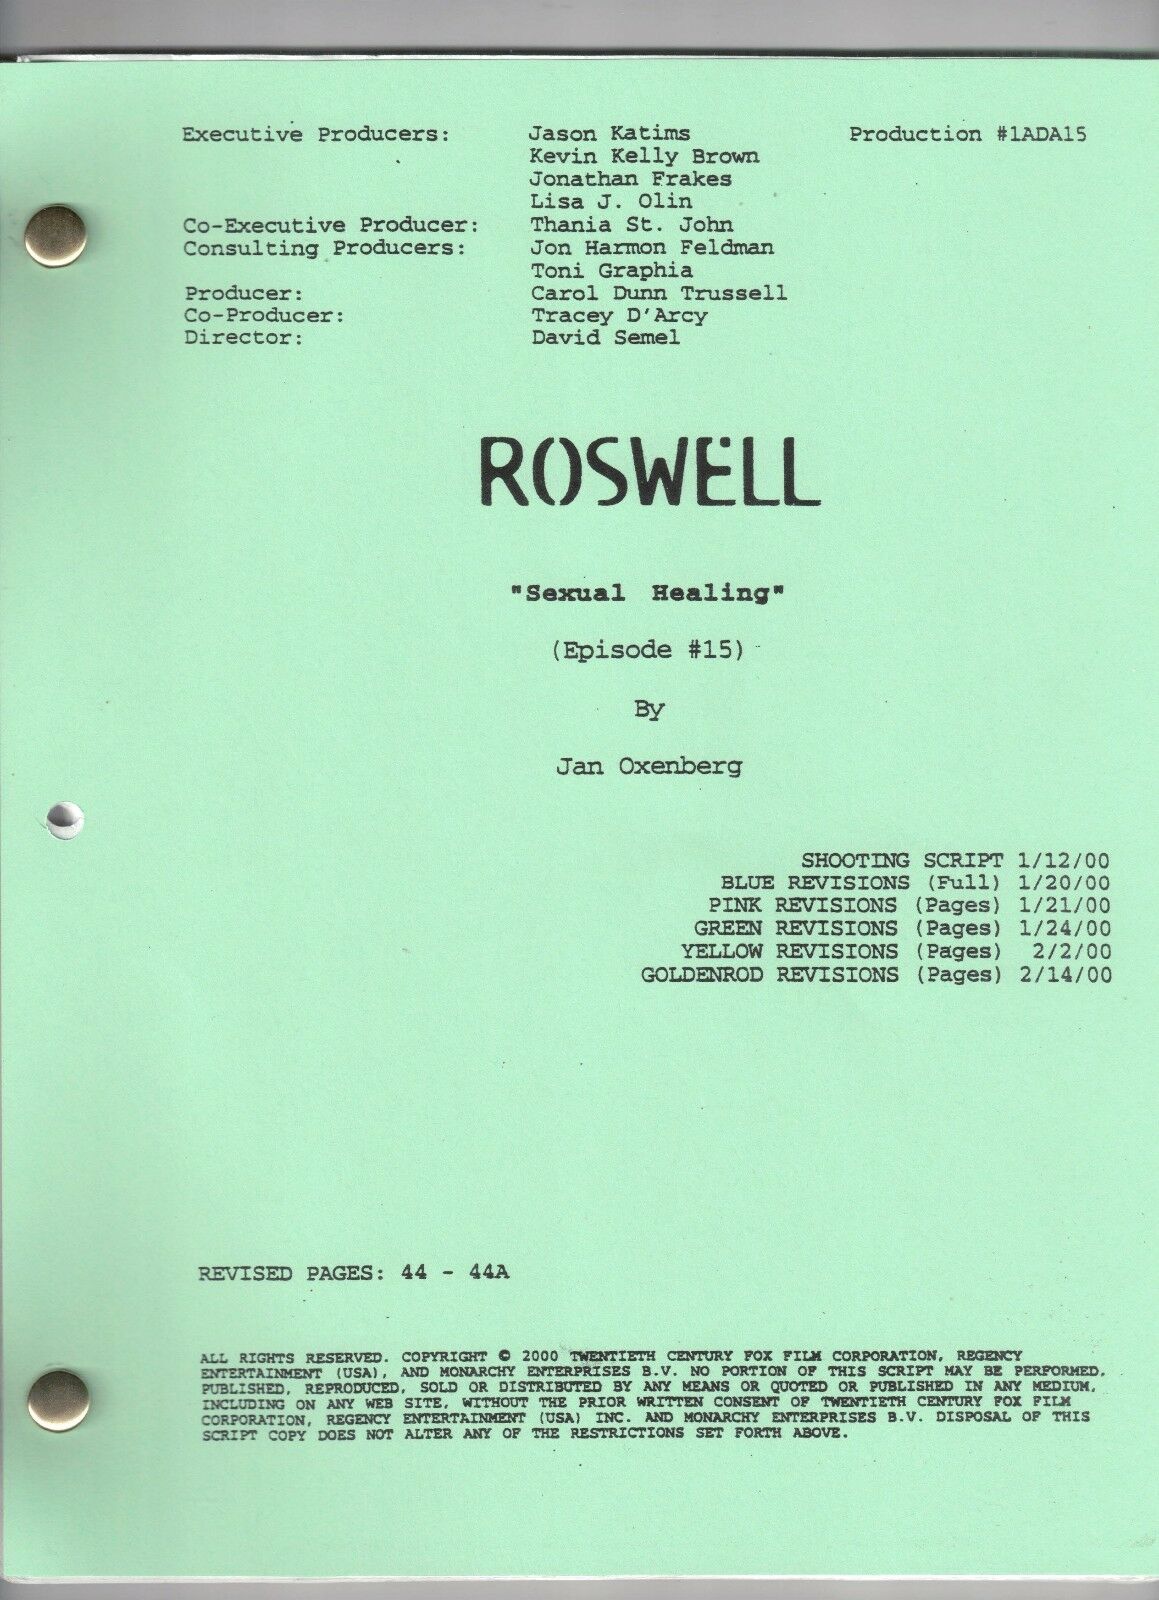 Roswell Show Script "sexual Healing"